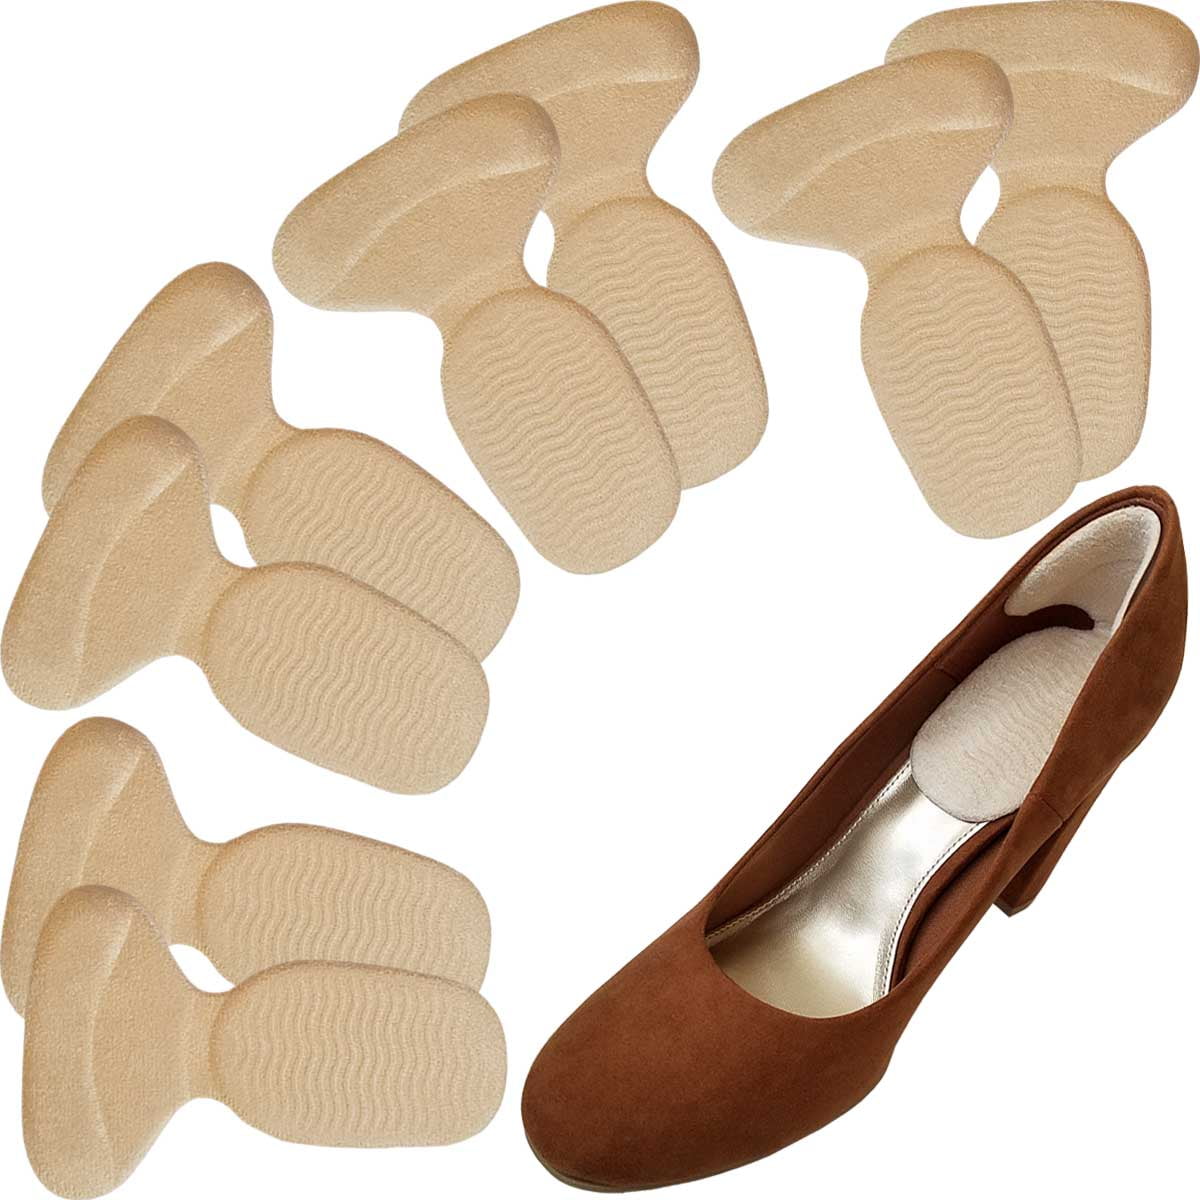 OFFER SALE Silicone Heel Pad Protector Cups For Swelling Pain Relief Foot  Care Heel Support - Buy OFFER SALE Silicone Heel Pad Protector Cups For  Swelling Pain Relief Foot Care Heel Support